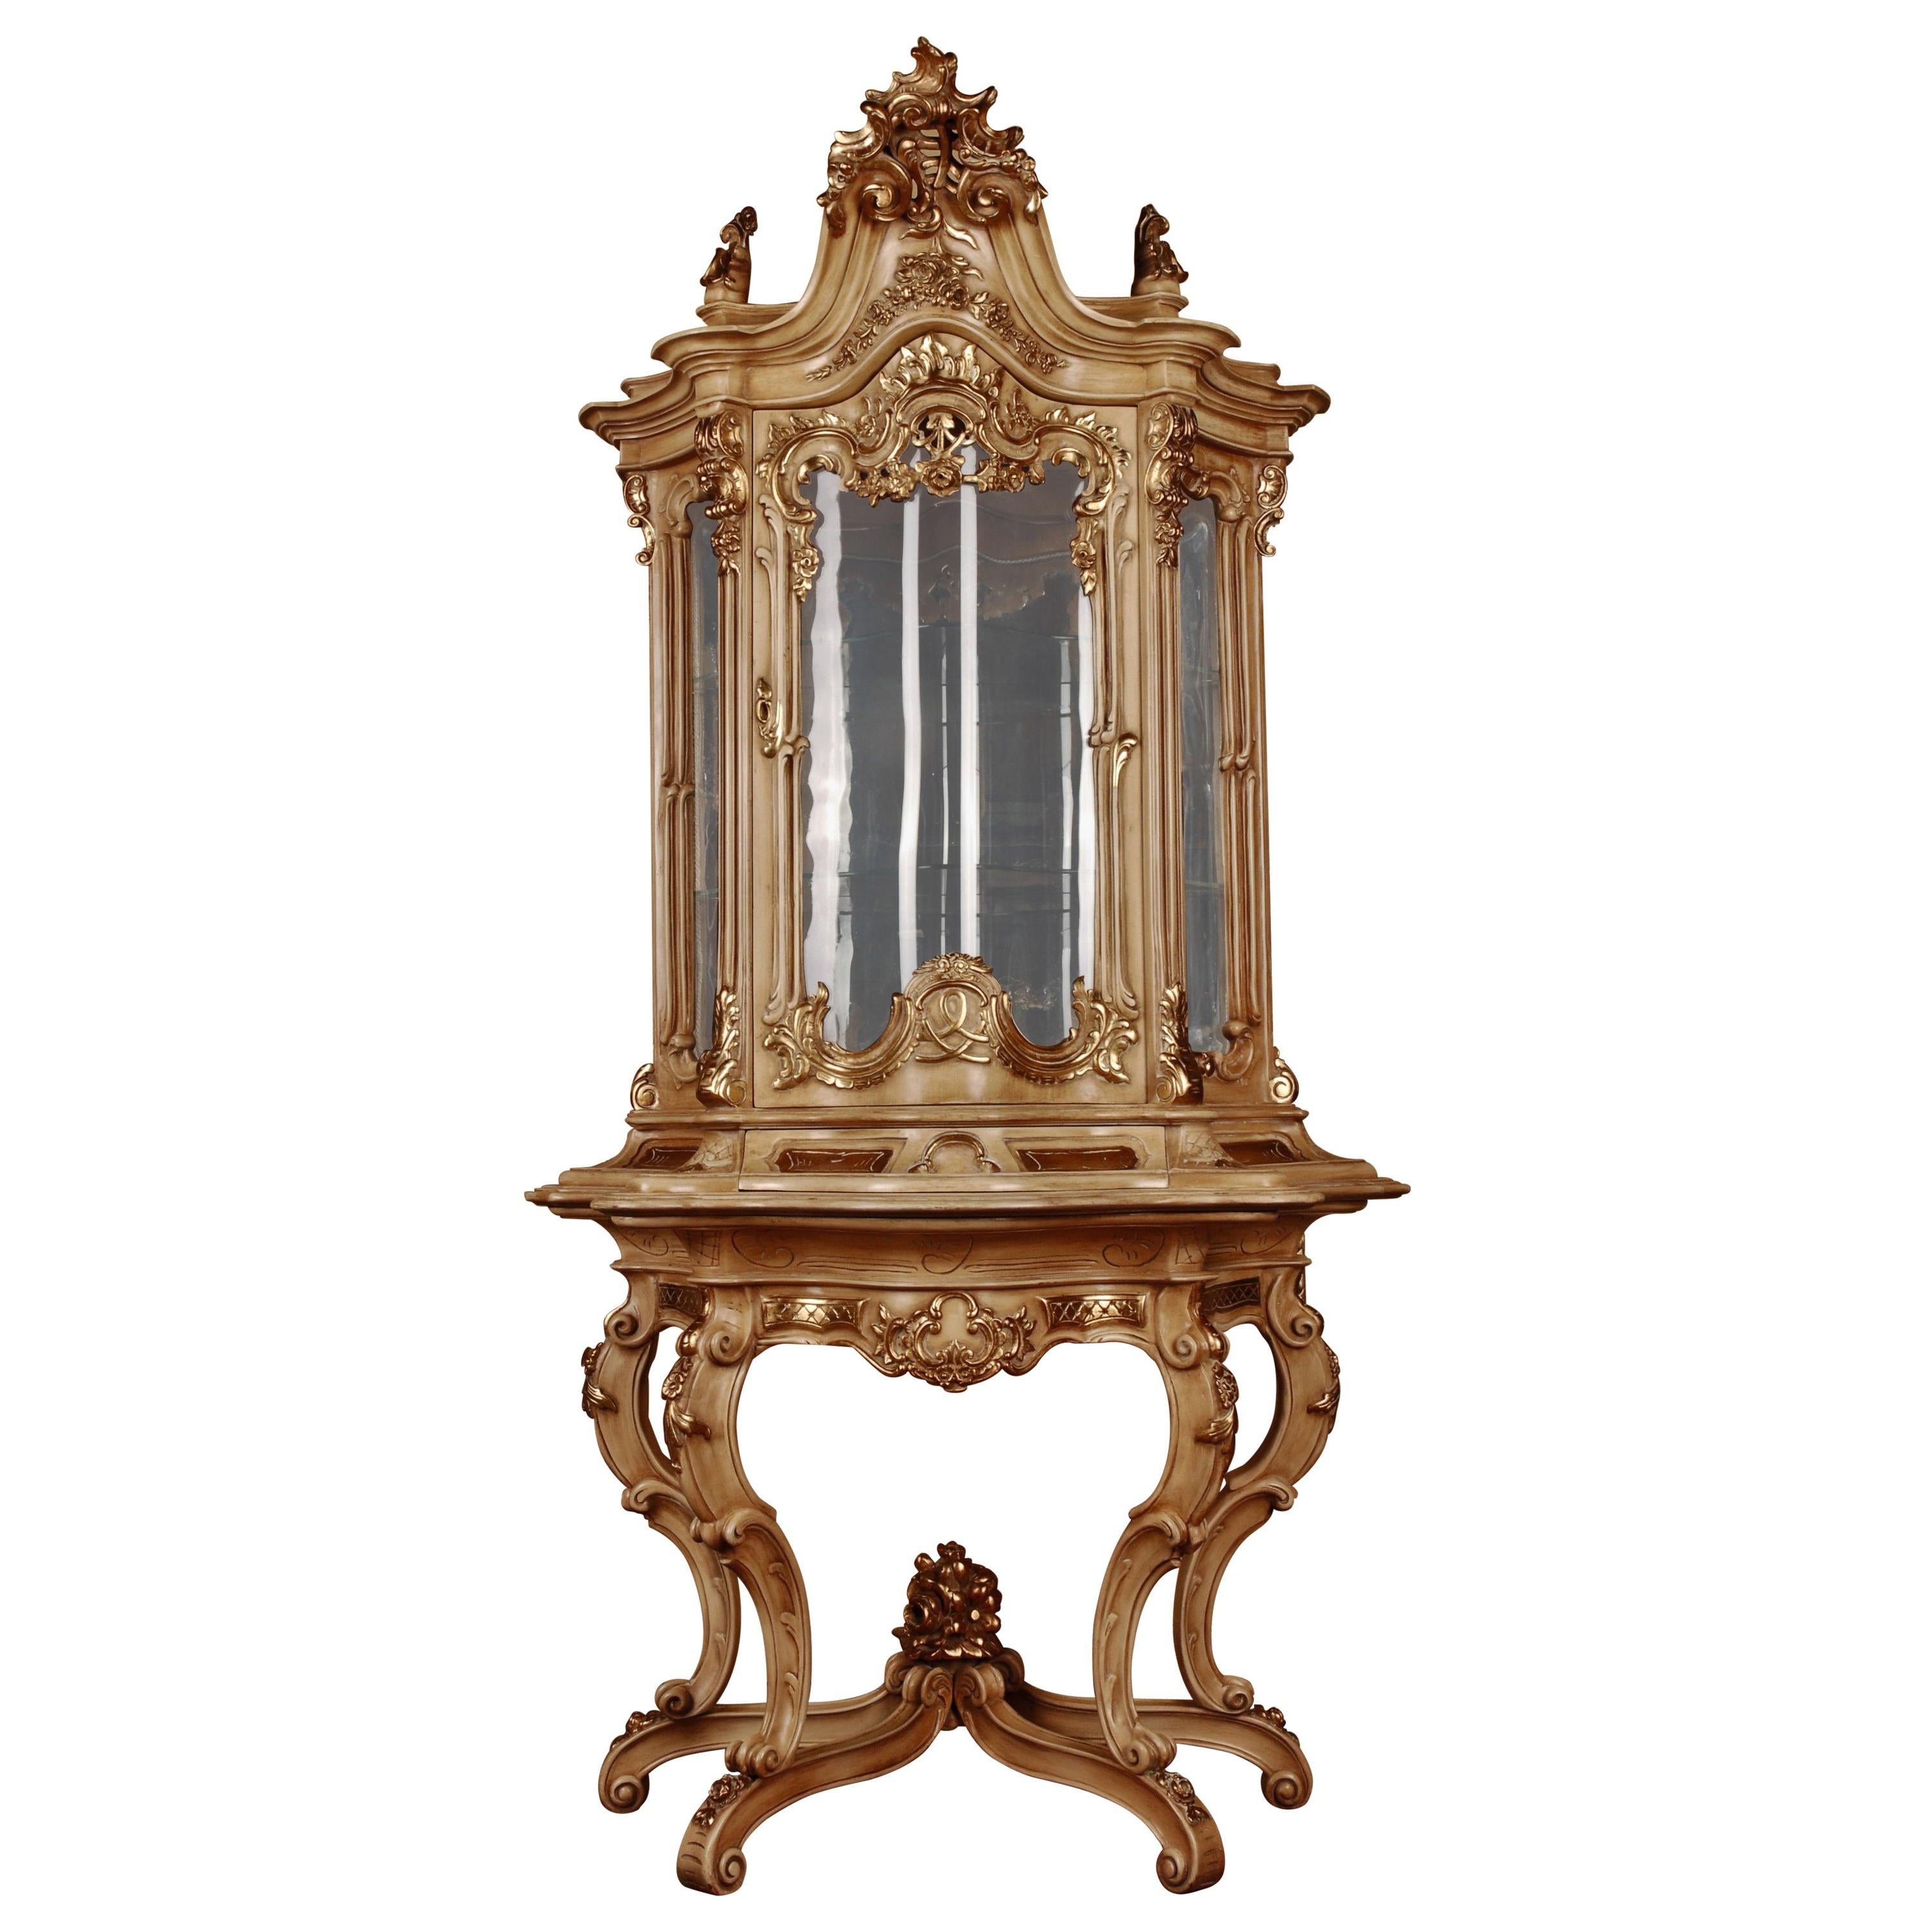 20th Century the Style of Frederick the Great Vitrine For Sale